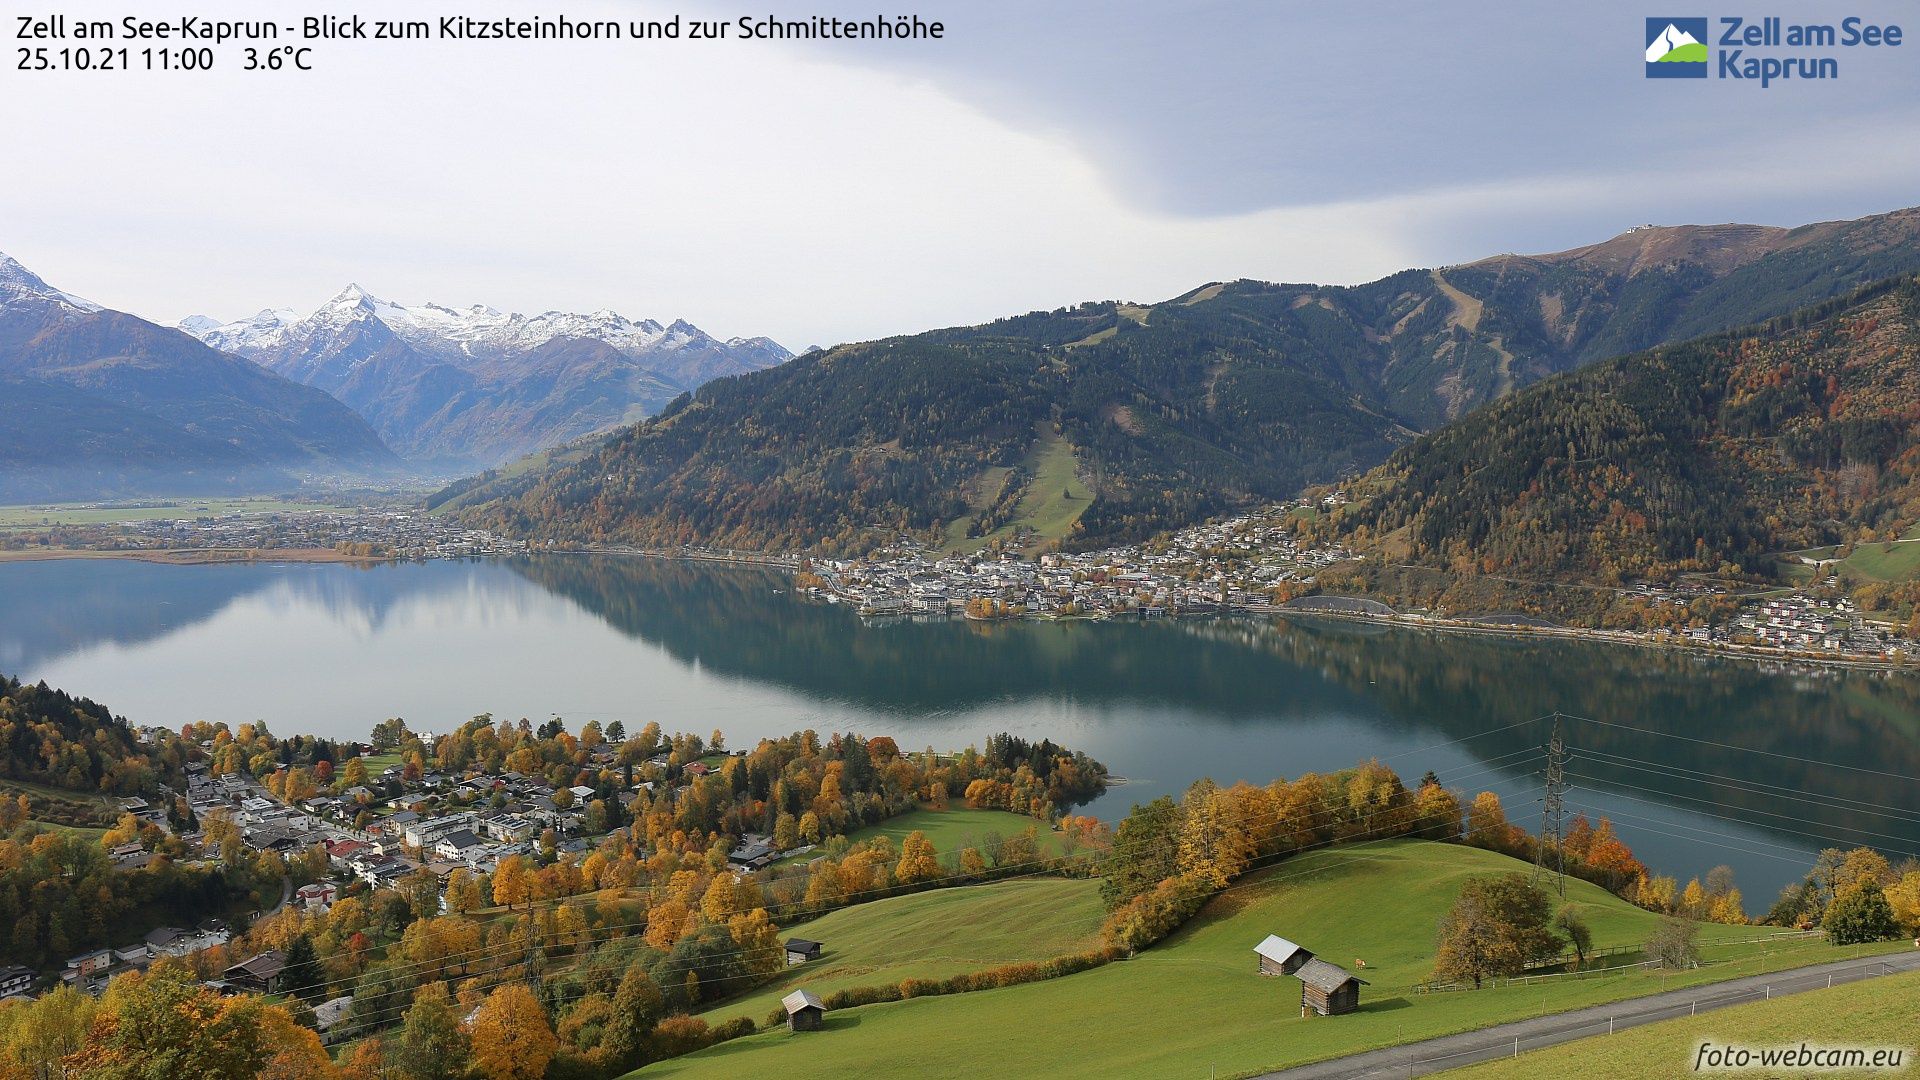 Nice autumn in the Alps! Like here in Zell am See (foto-webcam.eu)